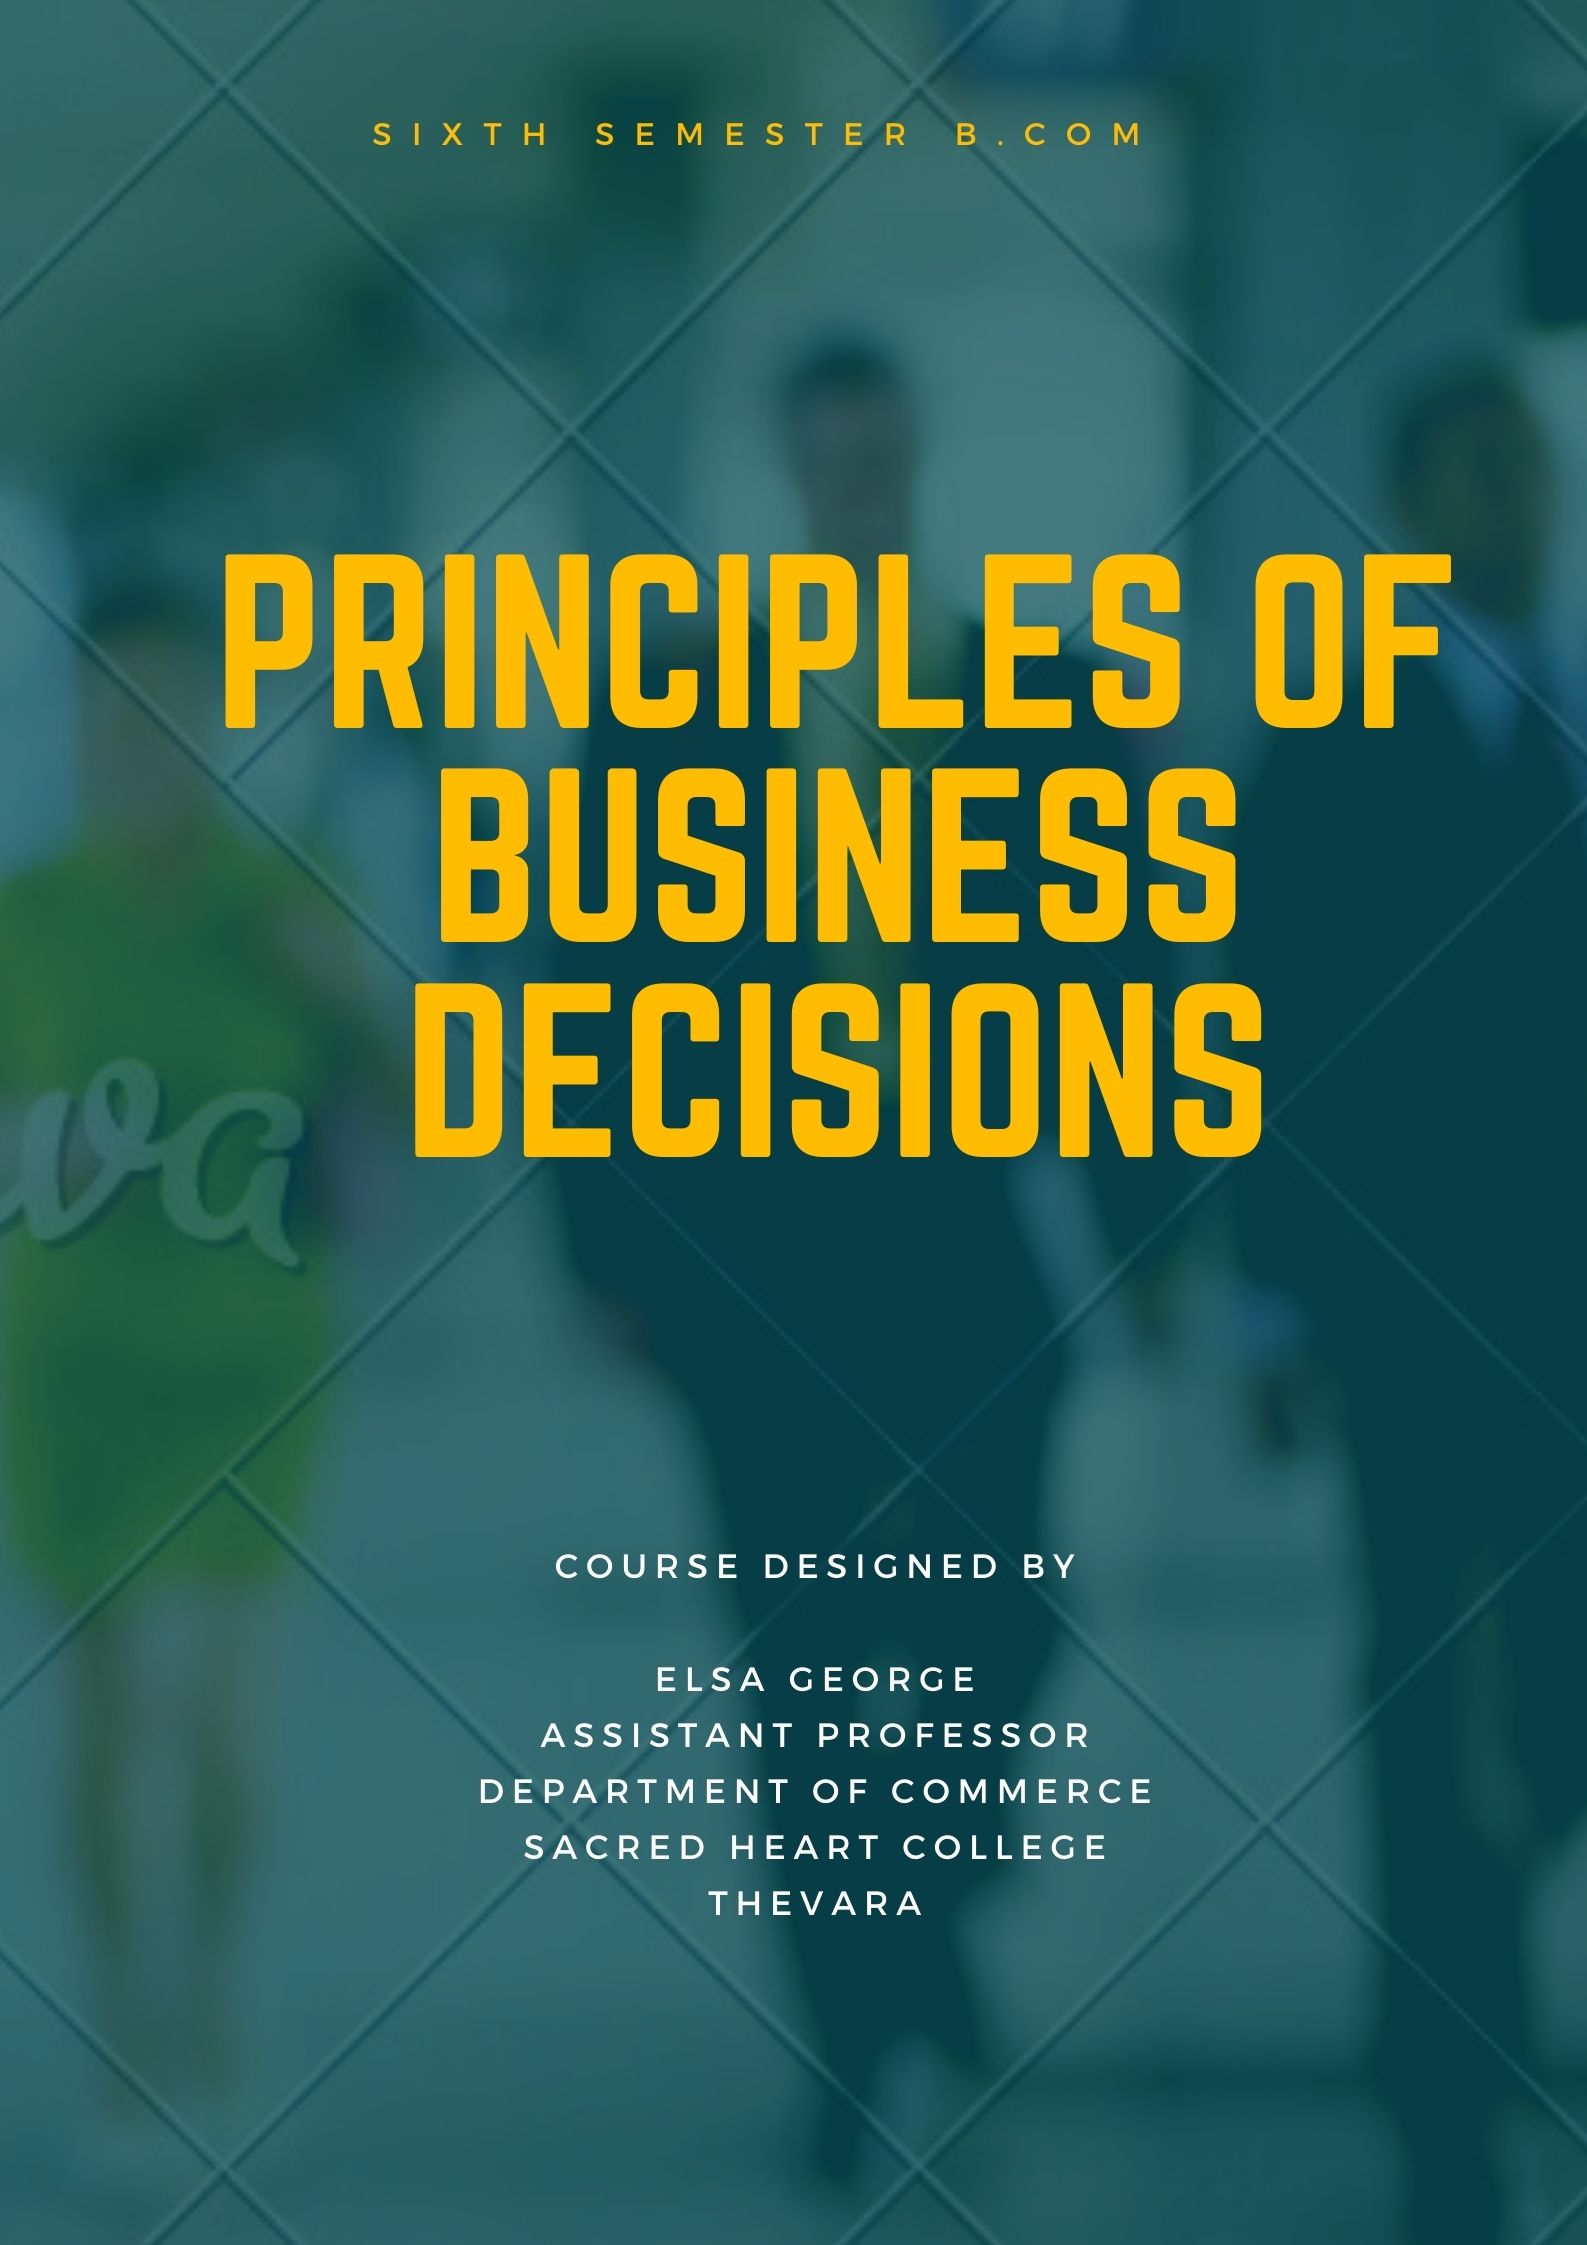 PRINCIPLES OF BUSINESS DECISIONS